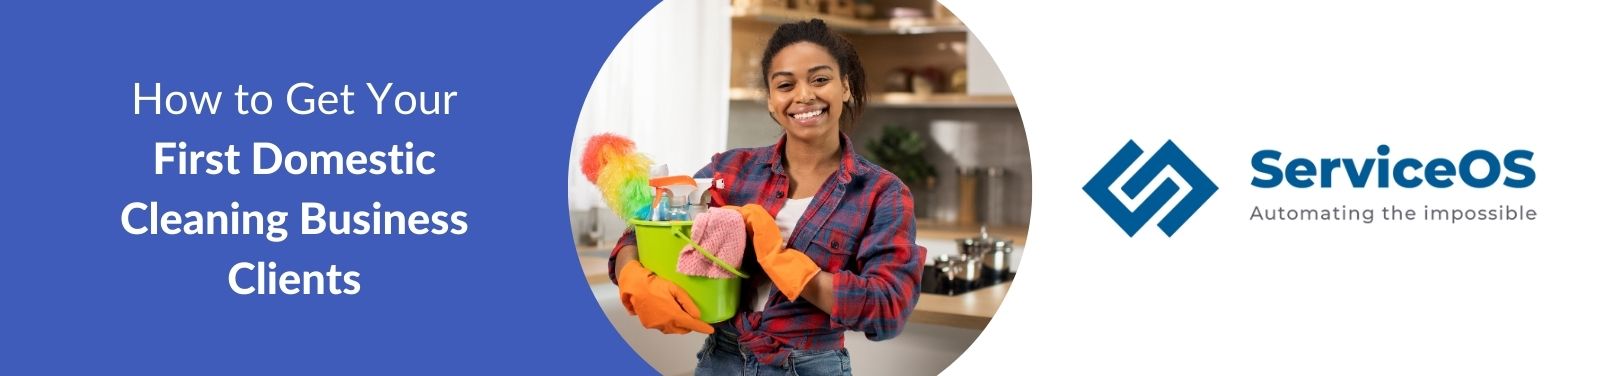 How to Get Your First Clients for a Domestic Cleaning Business